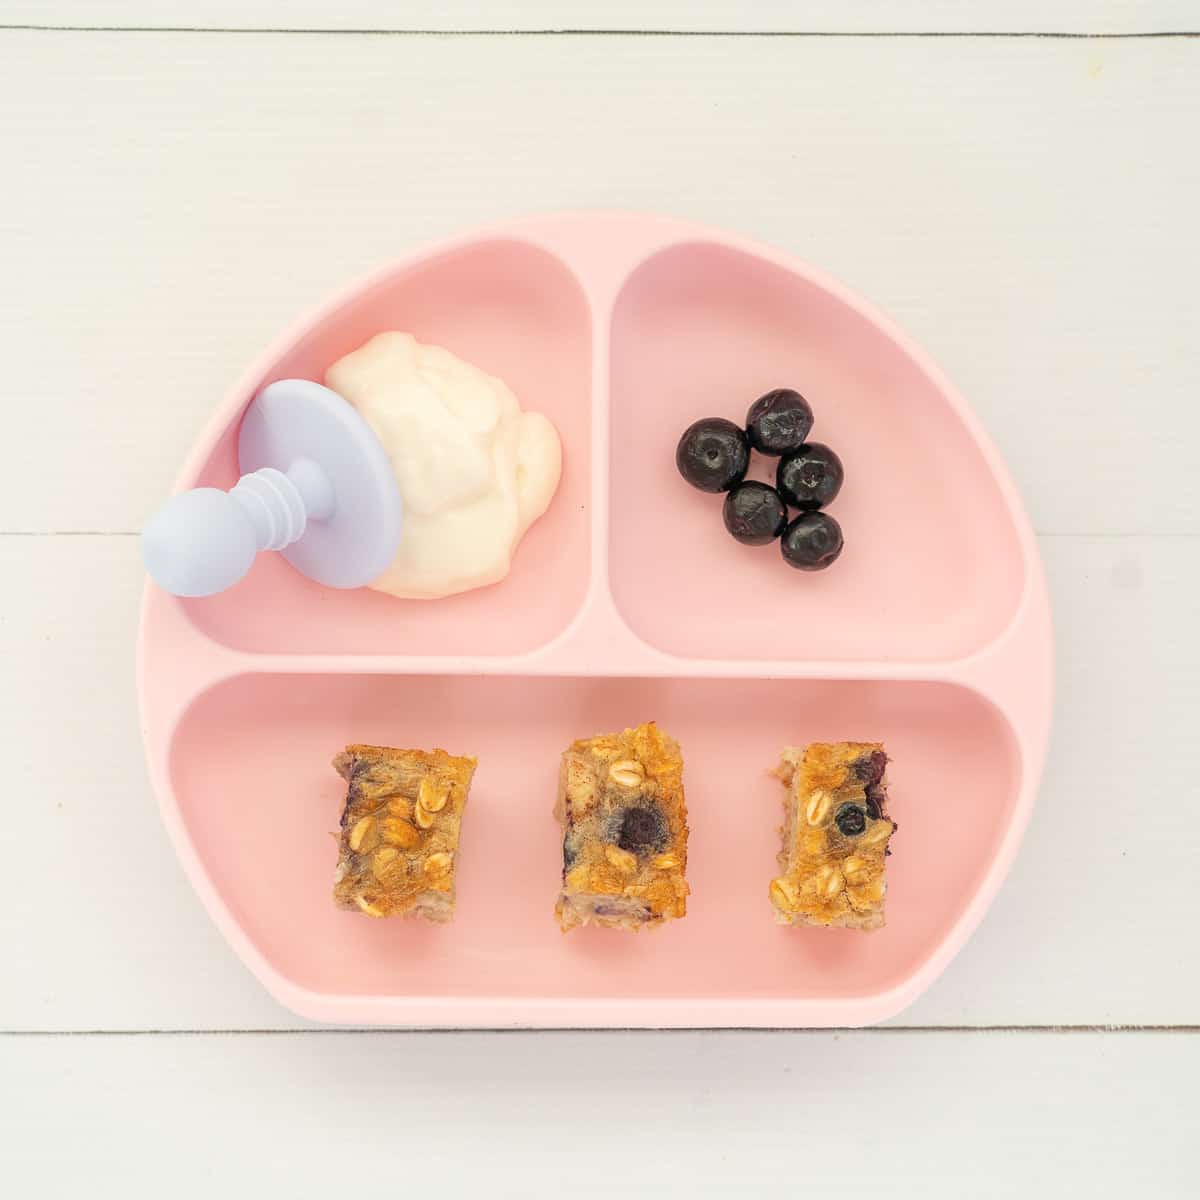 A pink divided baby plate with slices of baked oats, yoghurt and blueberries